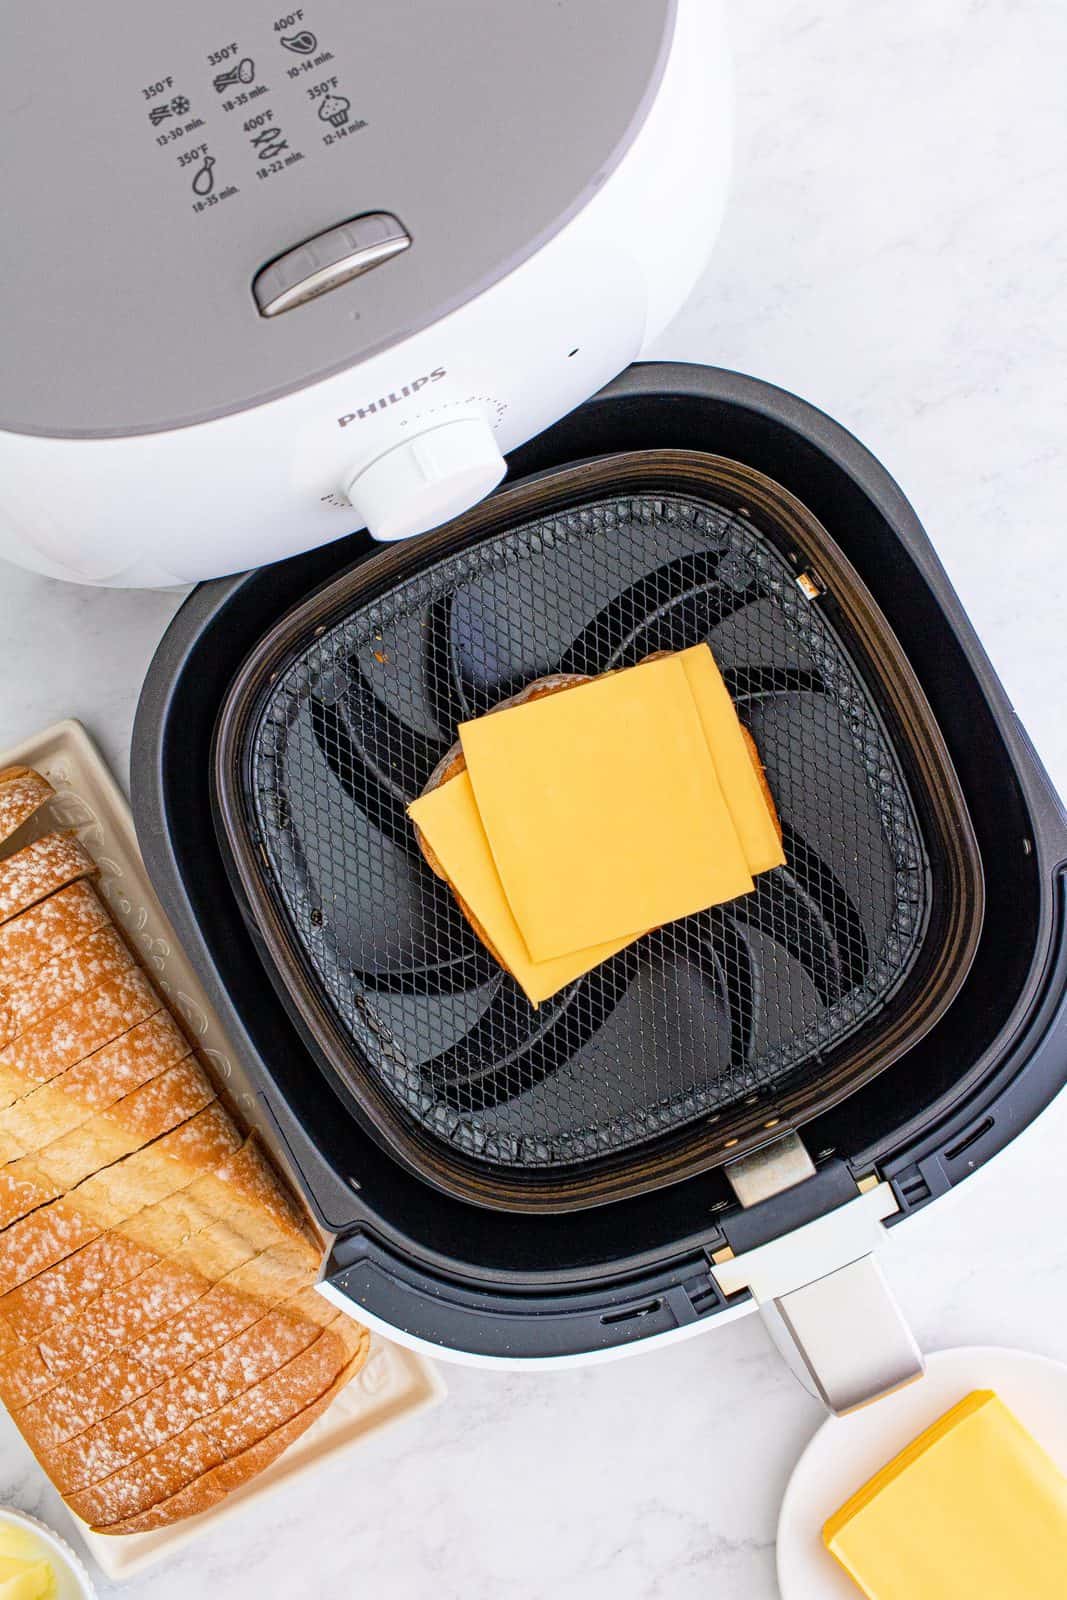 Cheese added to top of bread in air fryer basket.